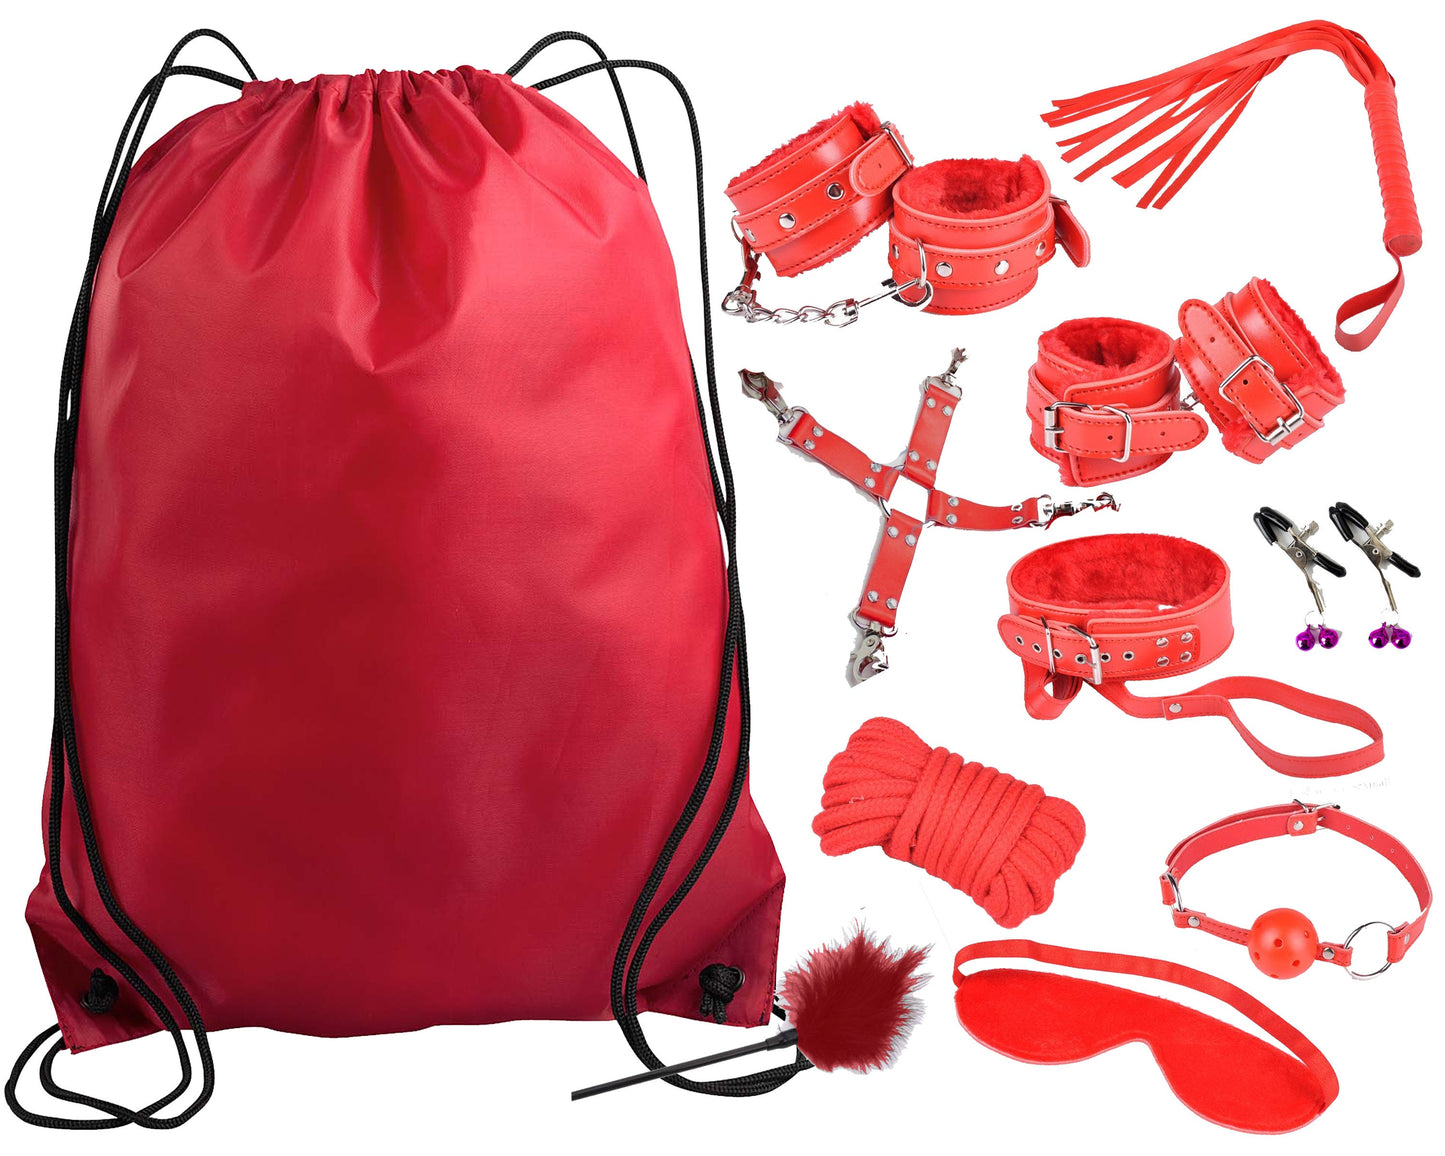 Daddy's Toy Bag Beginners Red Bondage Kit Daddy Master DDLG BDSM CGLG Submissive Dominant Rope Cuffs Leash Whip Nipple Clamps